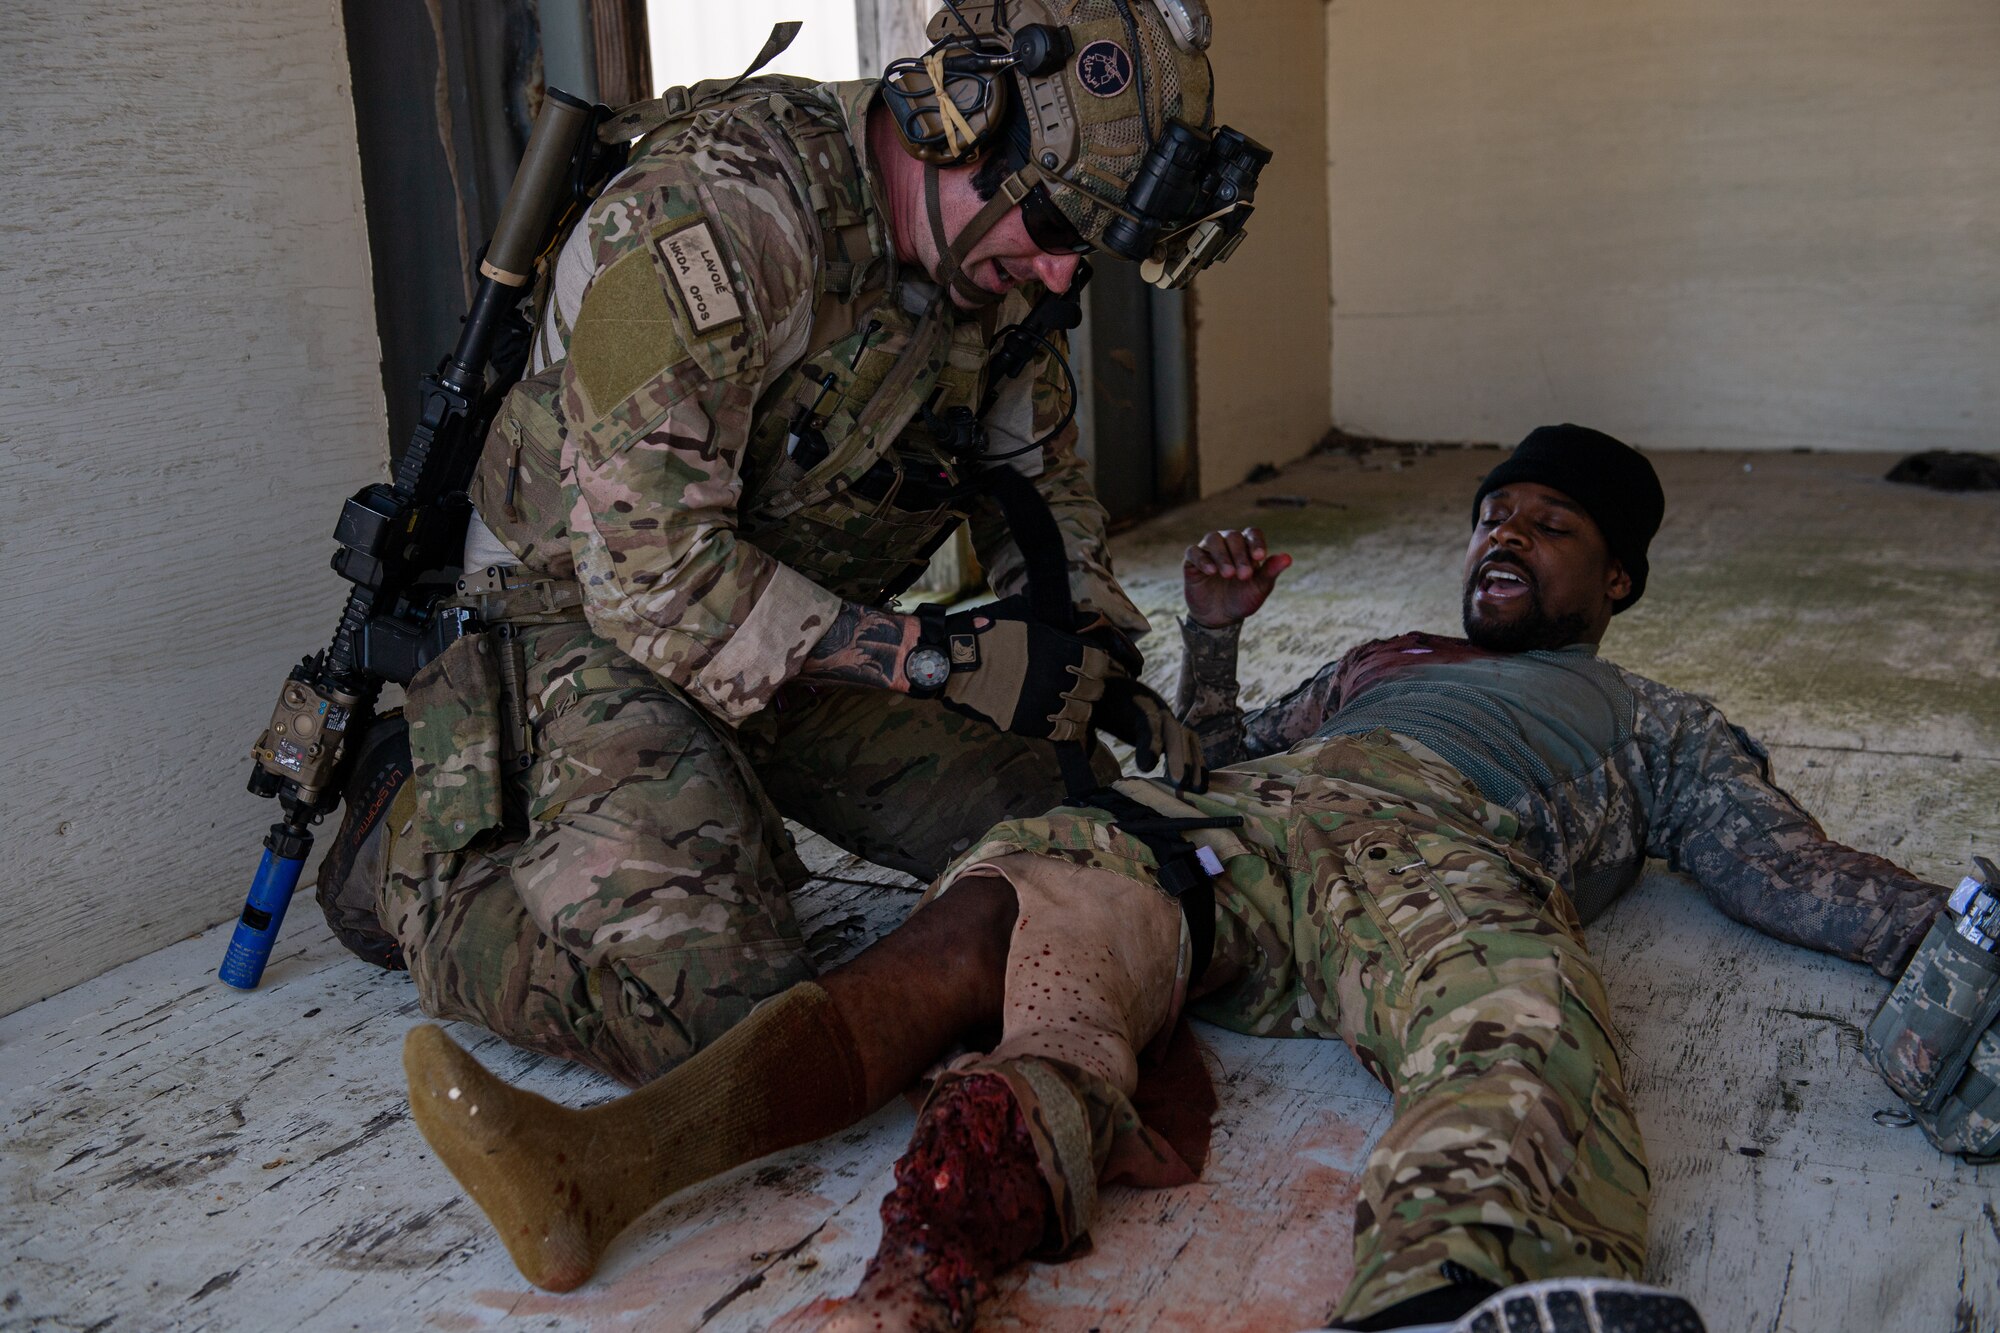 A photo of an Airman treating a simulated injured patient.